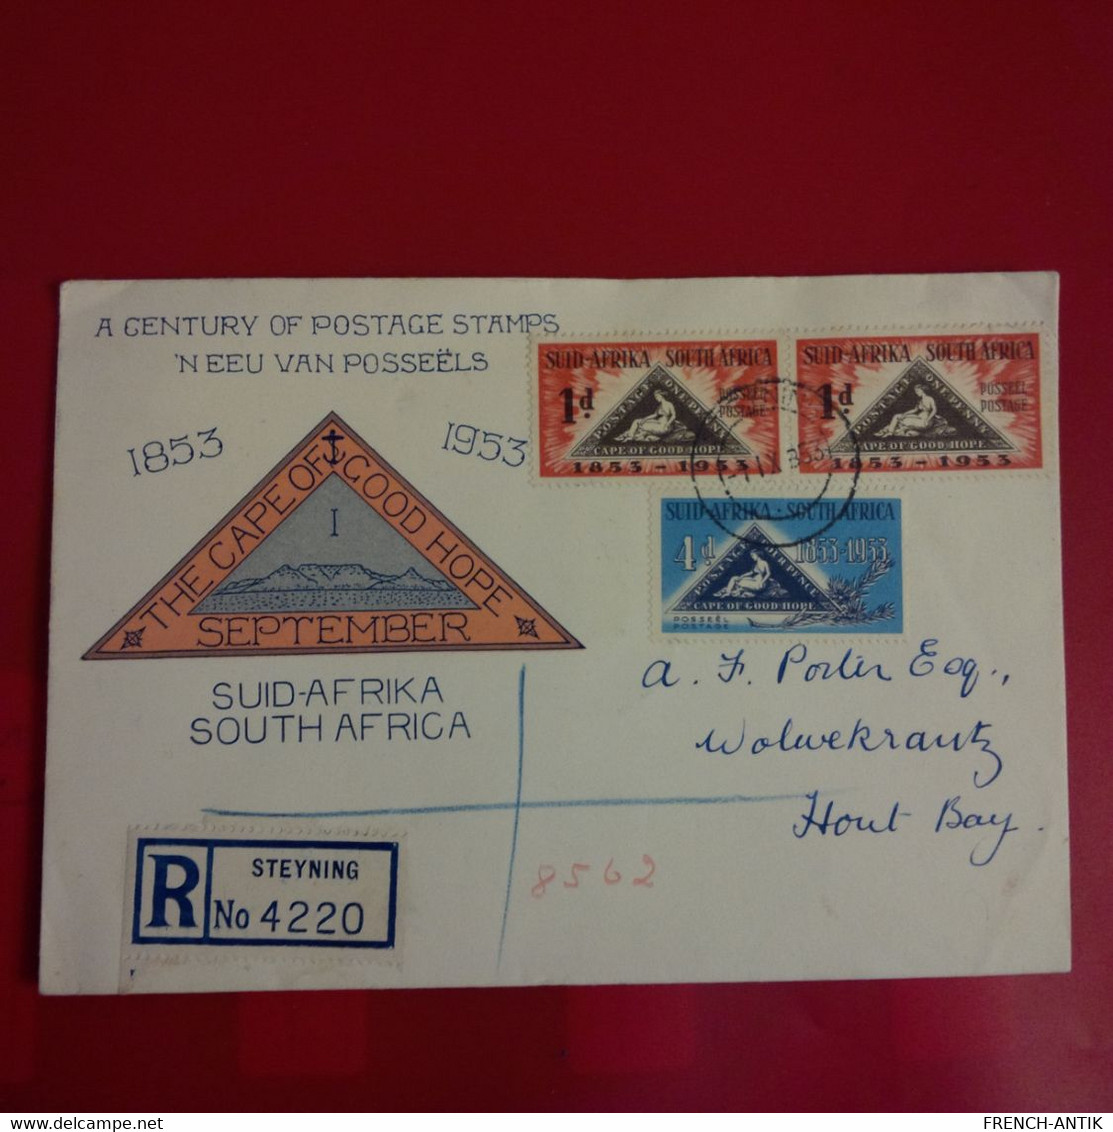 LETTRE SOUTH AFRICA A CENTURY OF POSTAGE STAMPS 1853 1953 RECOMMANDE STEYNING - Unclassified